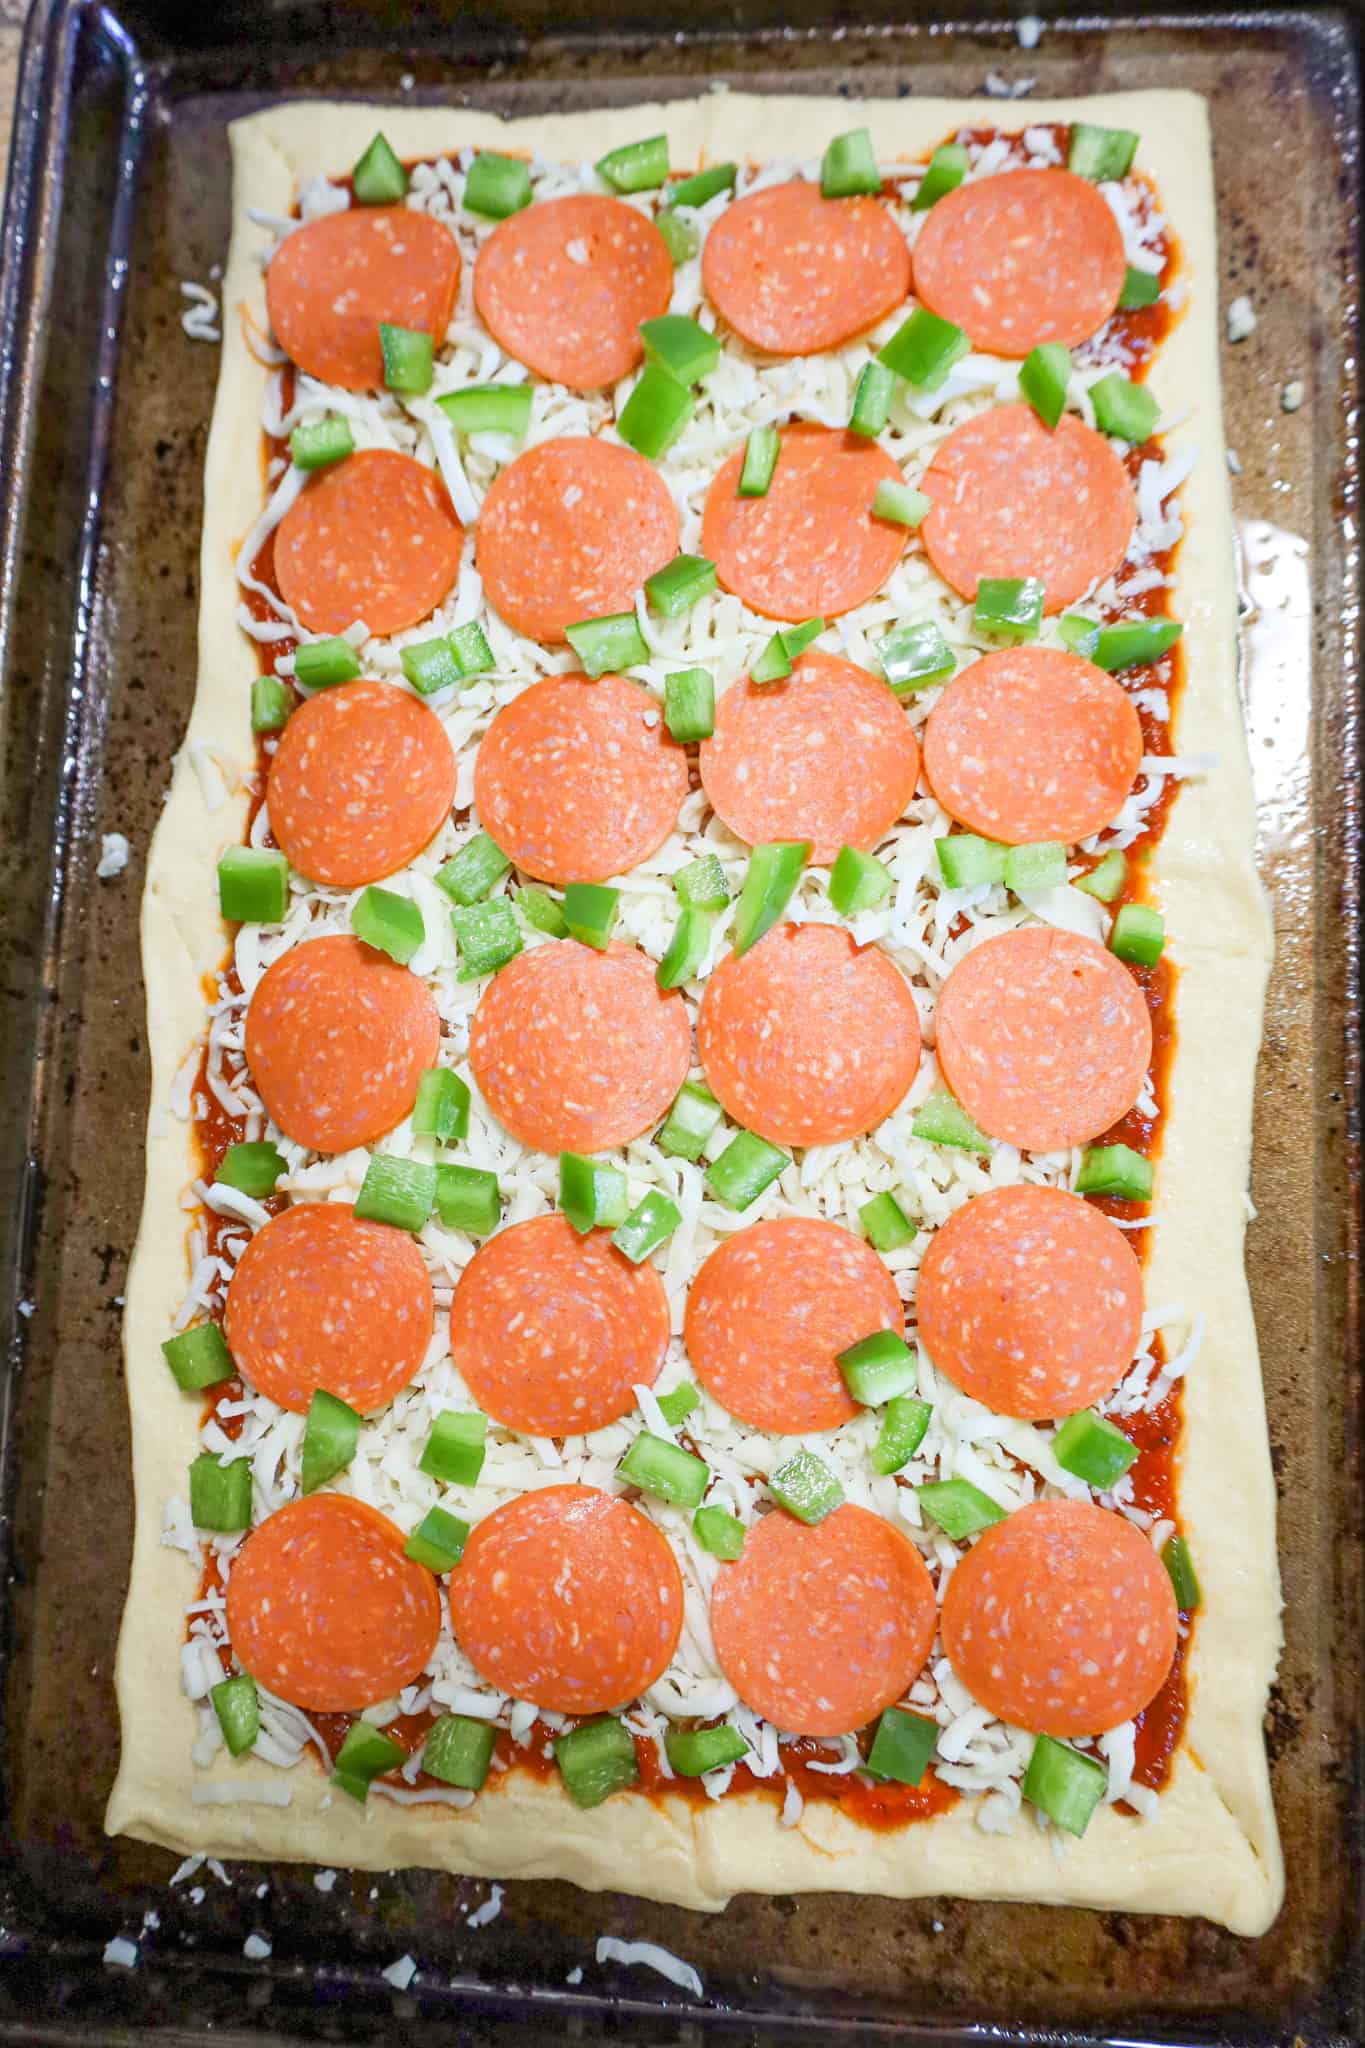 diced green peppers, pepperoni slices and shredded mozzarella cheese on top of crescent roll dough